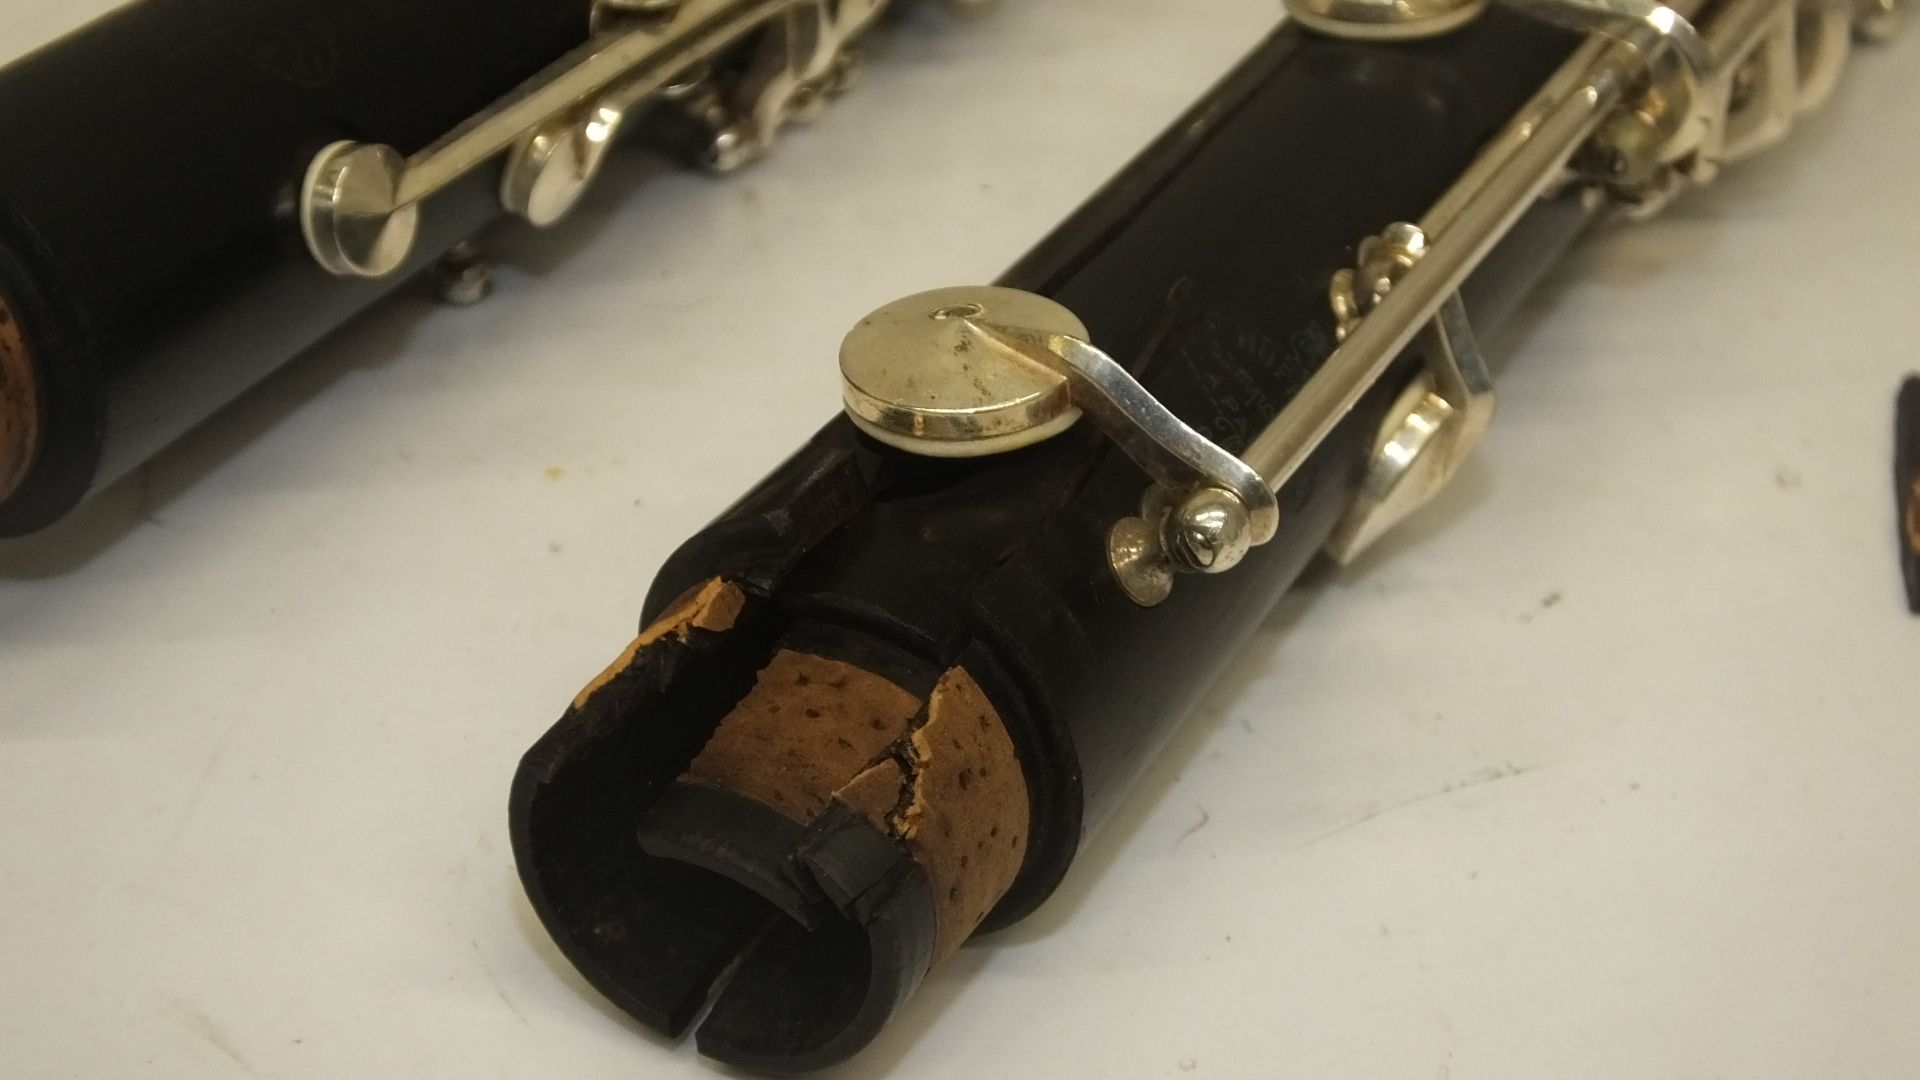 Buffet Crampon Clarinet (incomplete - damage as seen in pictures) - Serial Number - 275704 - Image 5 of 10